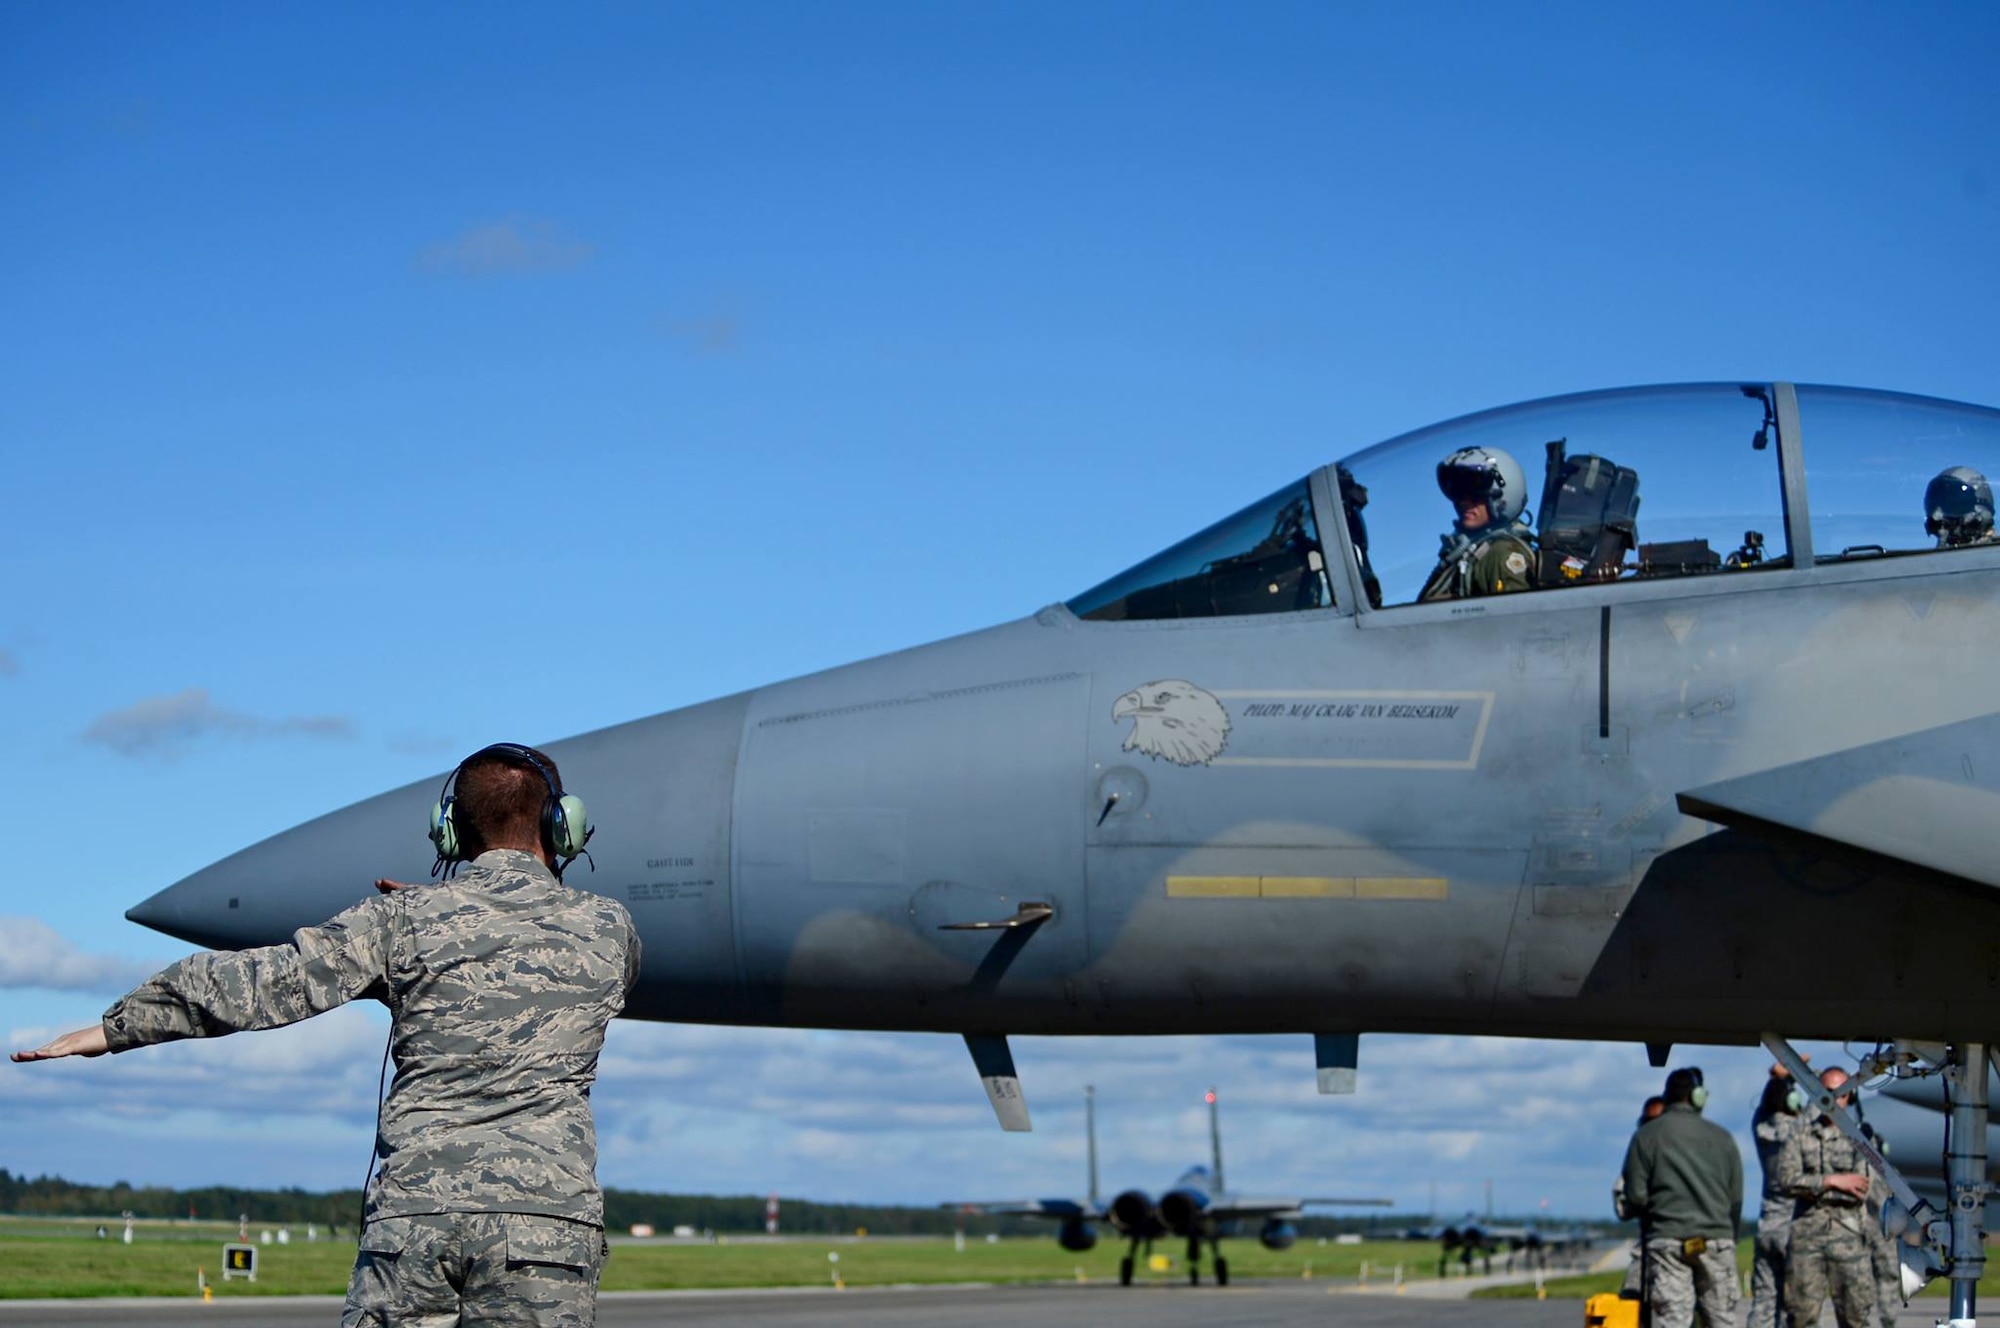 A U.S. Air Force 493rd Fighter Squadron pilot prepares for departure in an F-15D Eagle at Ämari Air Base, Estonia, Aug. 24, 2016. Martha Raddatz, ABC News chief global affairs correspondent, received a familiarization flight in the back of the aircraft to become familiar with the aircraft’s capabilities during the squadron’s multilateral flying training deployment. Five countries are participating in the FTD, which allows for various aircraft and Airmen to test their capabilities against each other in a realistic training environment. The 493rd FS is assigned to Royal Air Force Lakenheath, England. (U.S. Air Force photo by Senior Airman Erin Trower/Released)